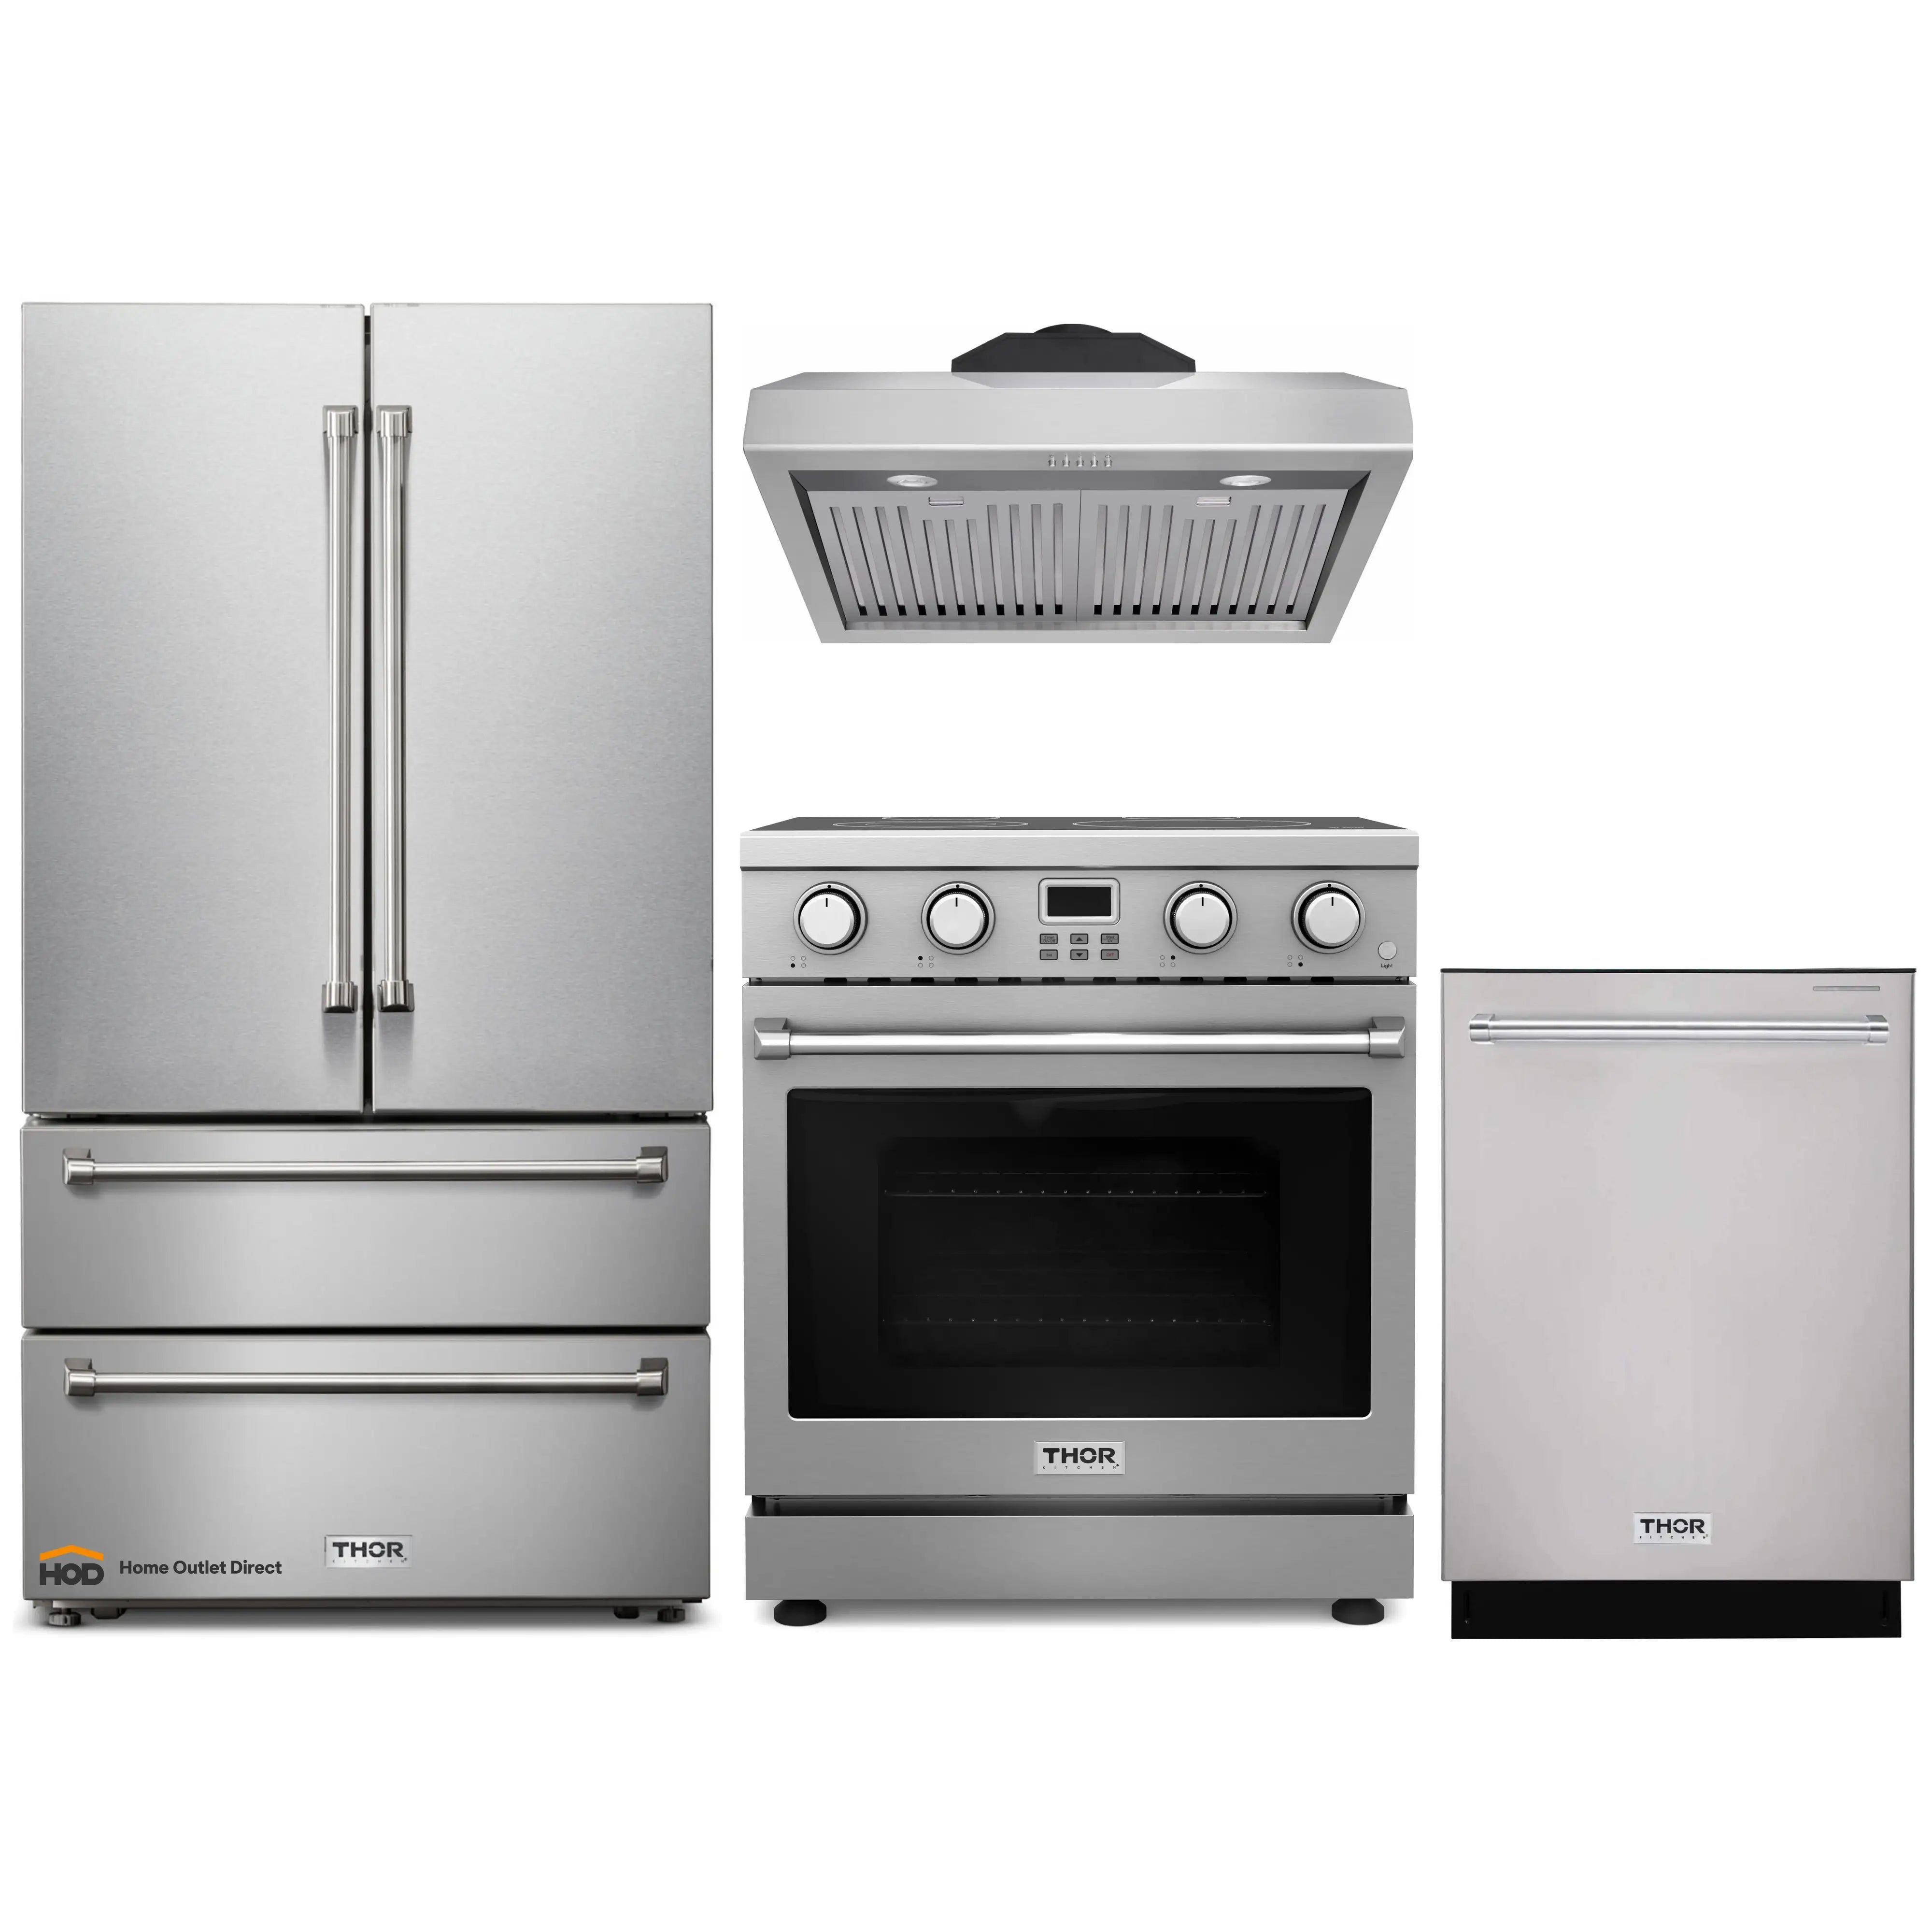 Thor Kitchen 4-Piece Appliance Package - 30-Inch Electric Range, Under Cabinet Range Hood, Refrigerator, and Dishwasher in Stainless Steel